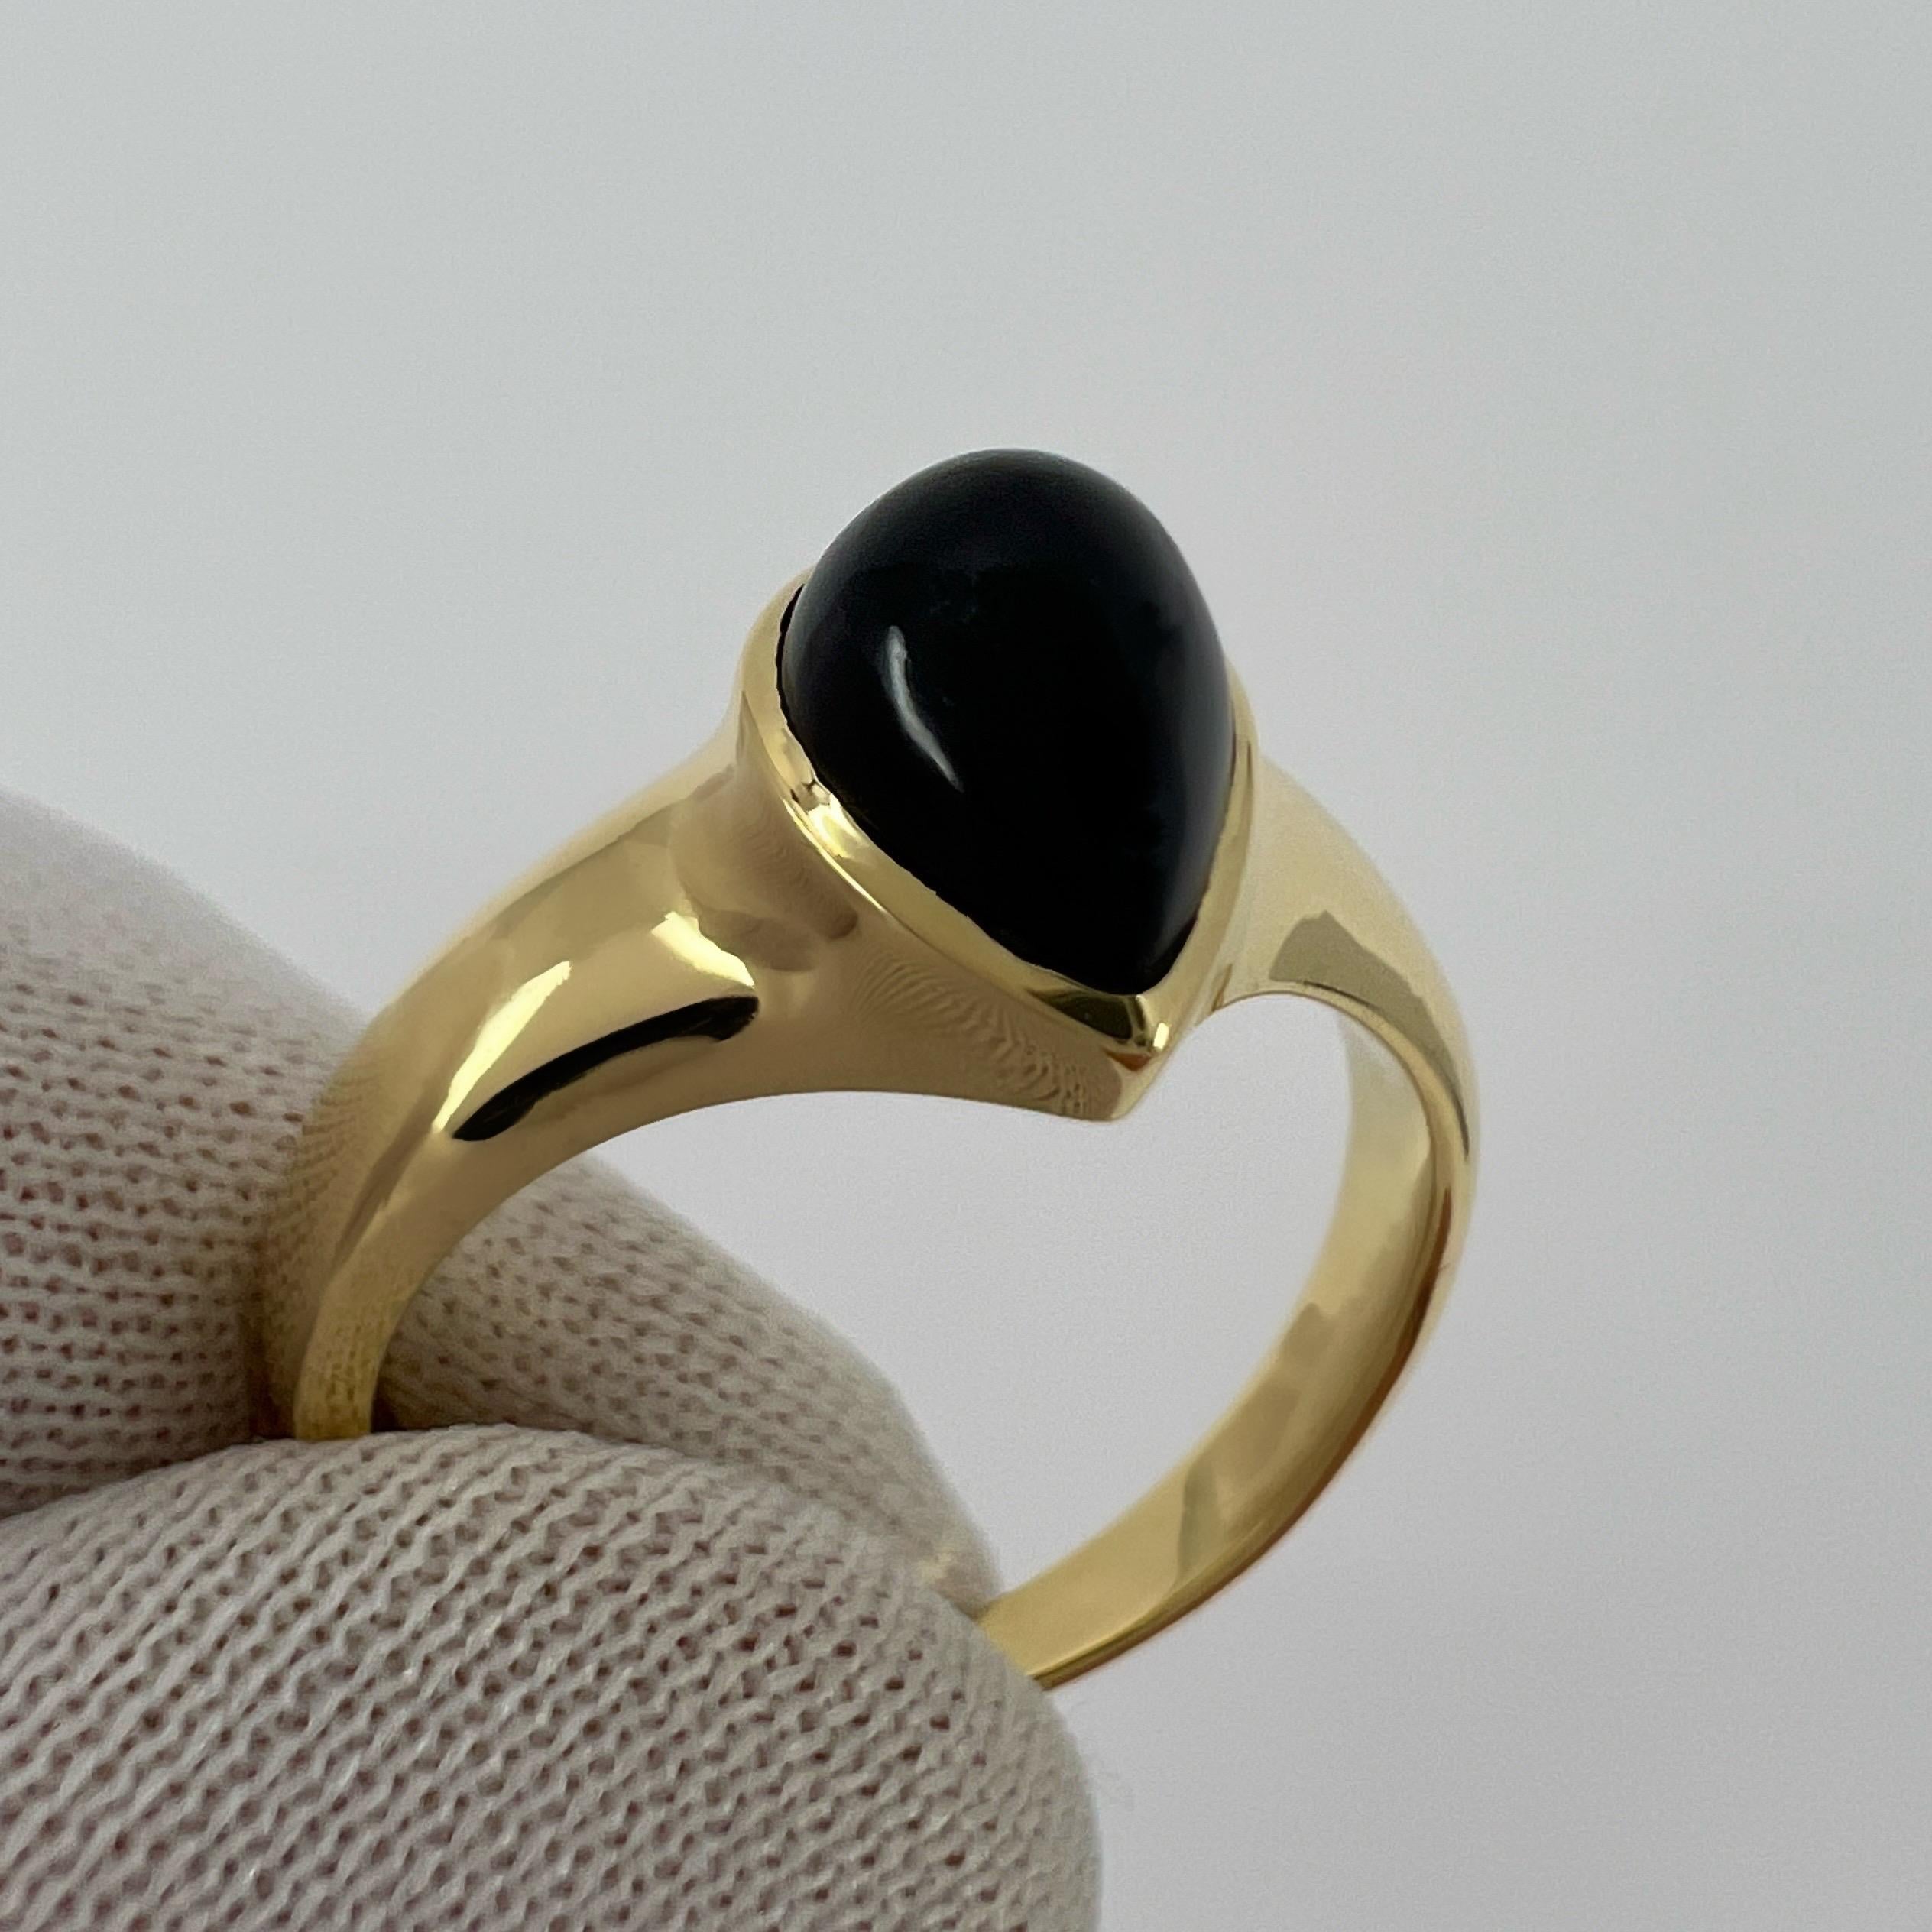 Rare Vintage Van Cleef & Arpels Black Onyx Pear Cabochon 18k Yellow Gold Ring For Sale 6